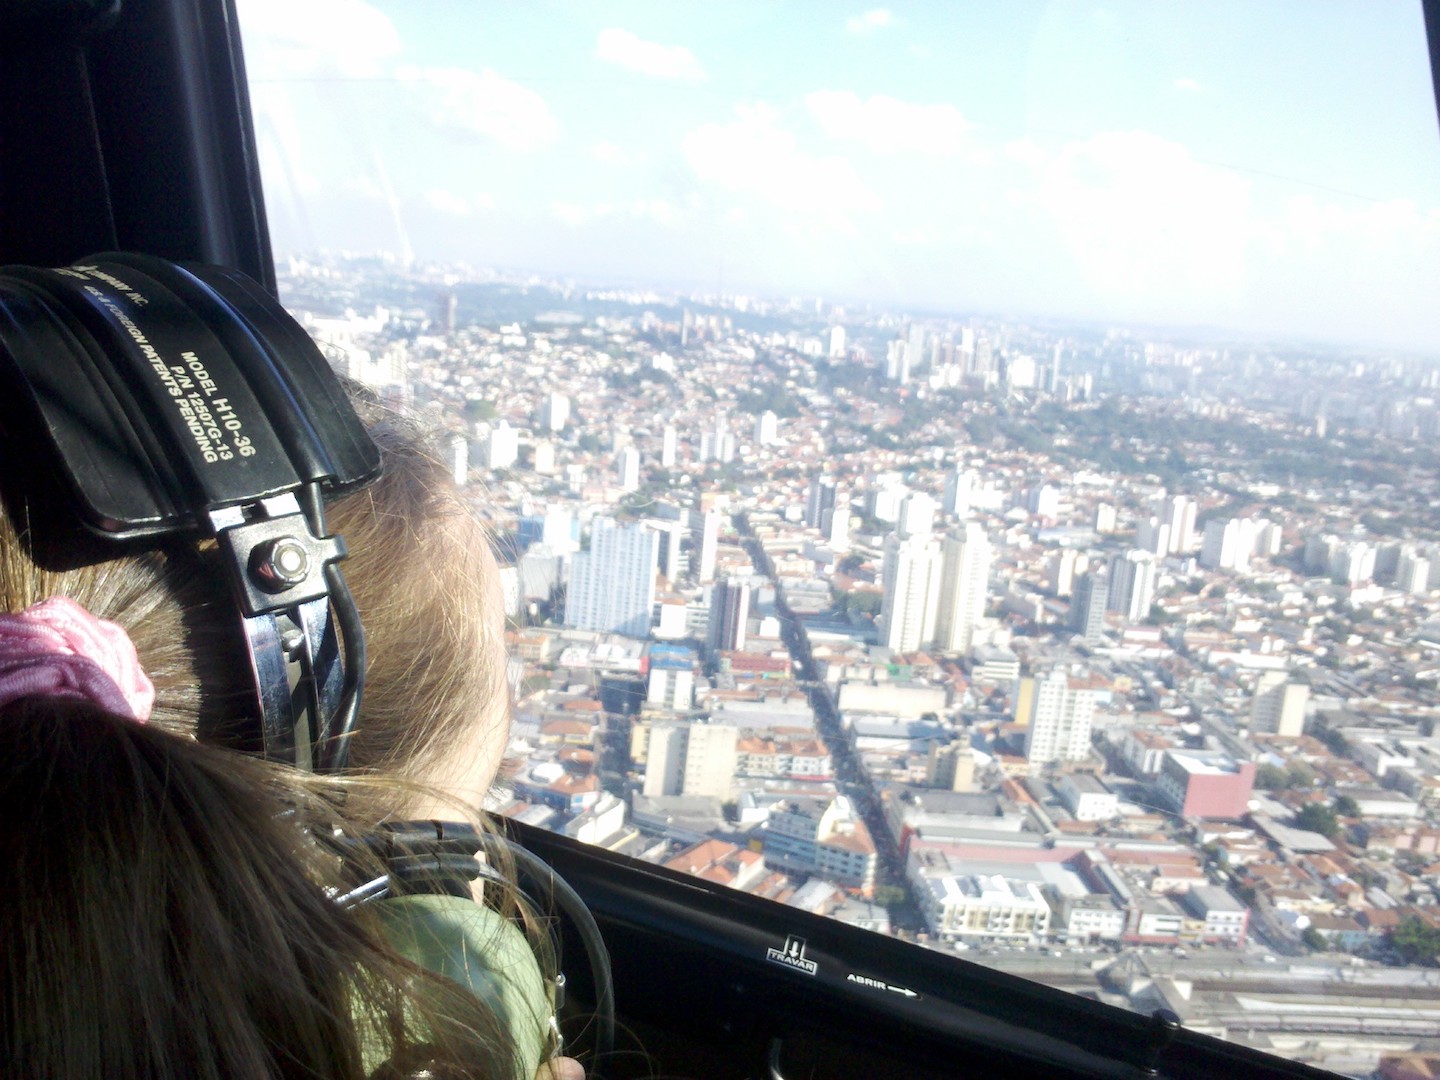 Brazil,Helicopter rides in São Paulo are a popular tourist attraction,